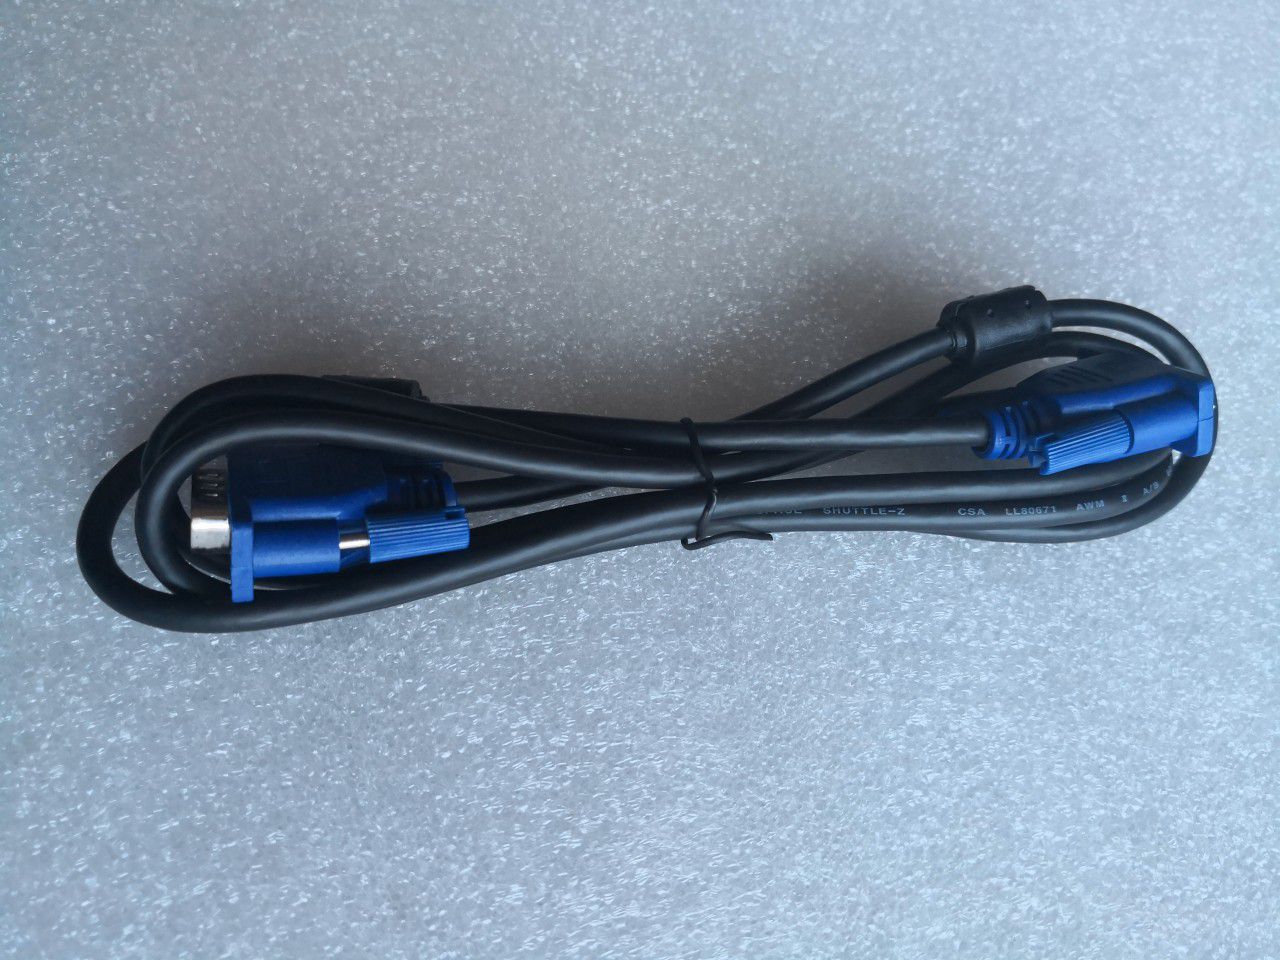 VGA Video Cable for TV Computer Monitor Male to Male (Blue Connector)